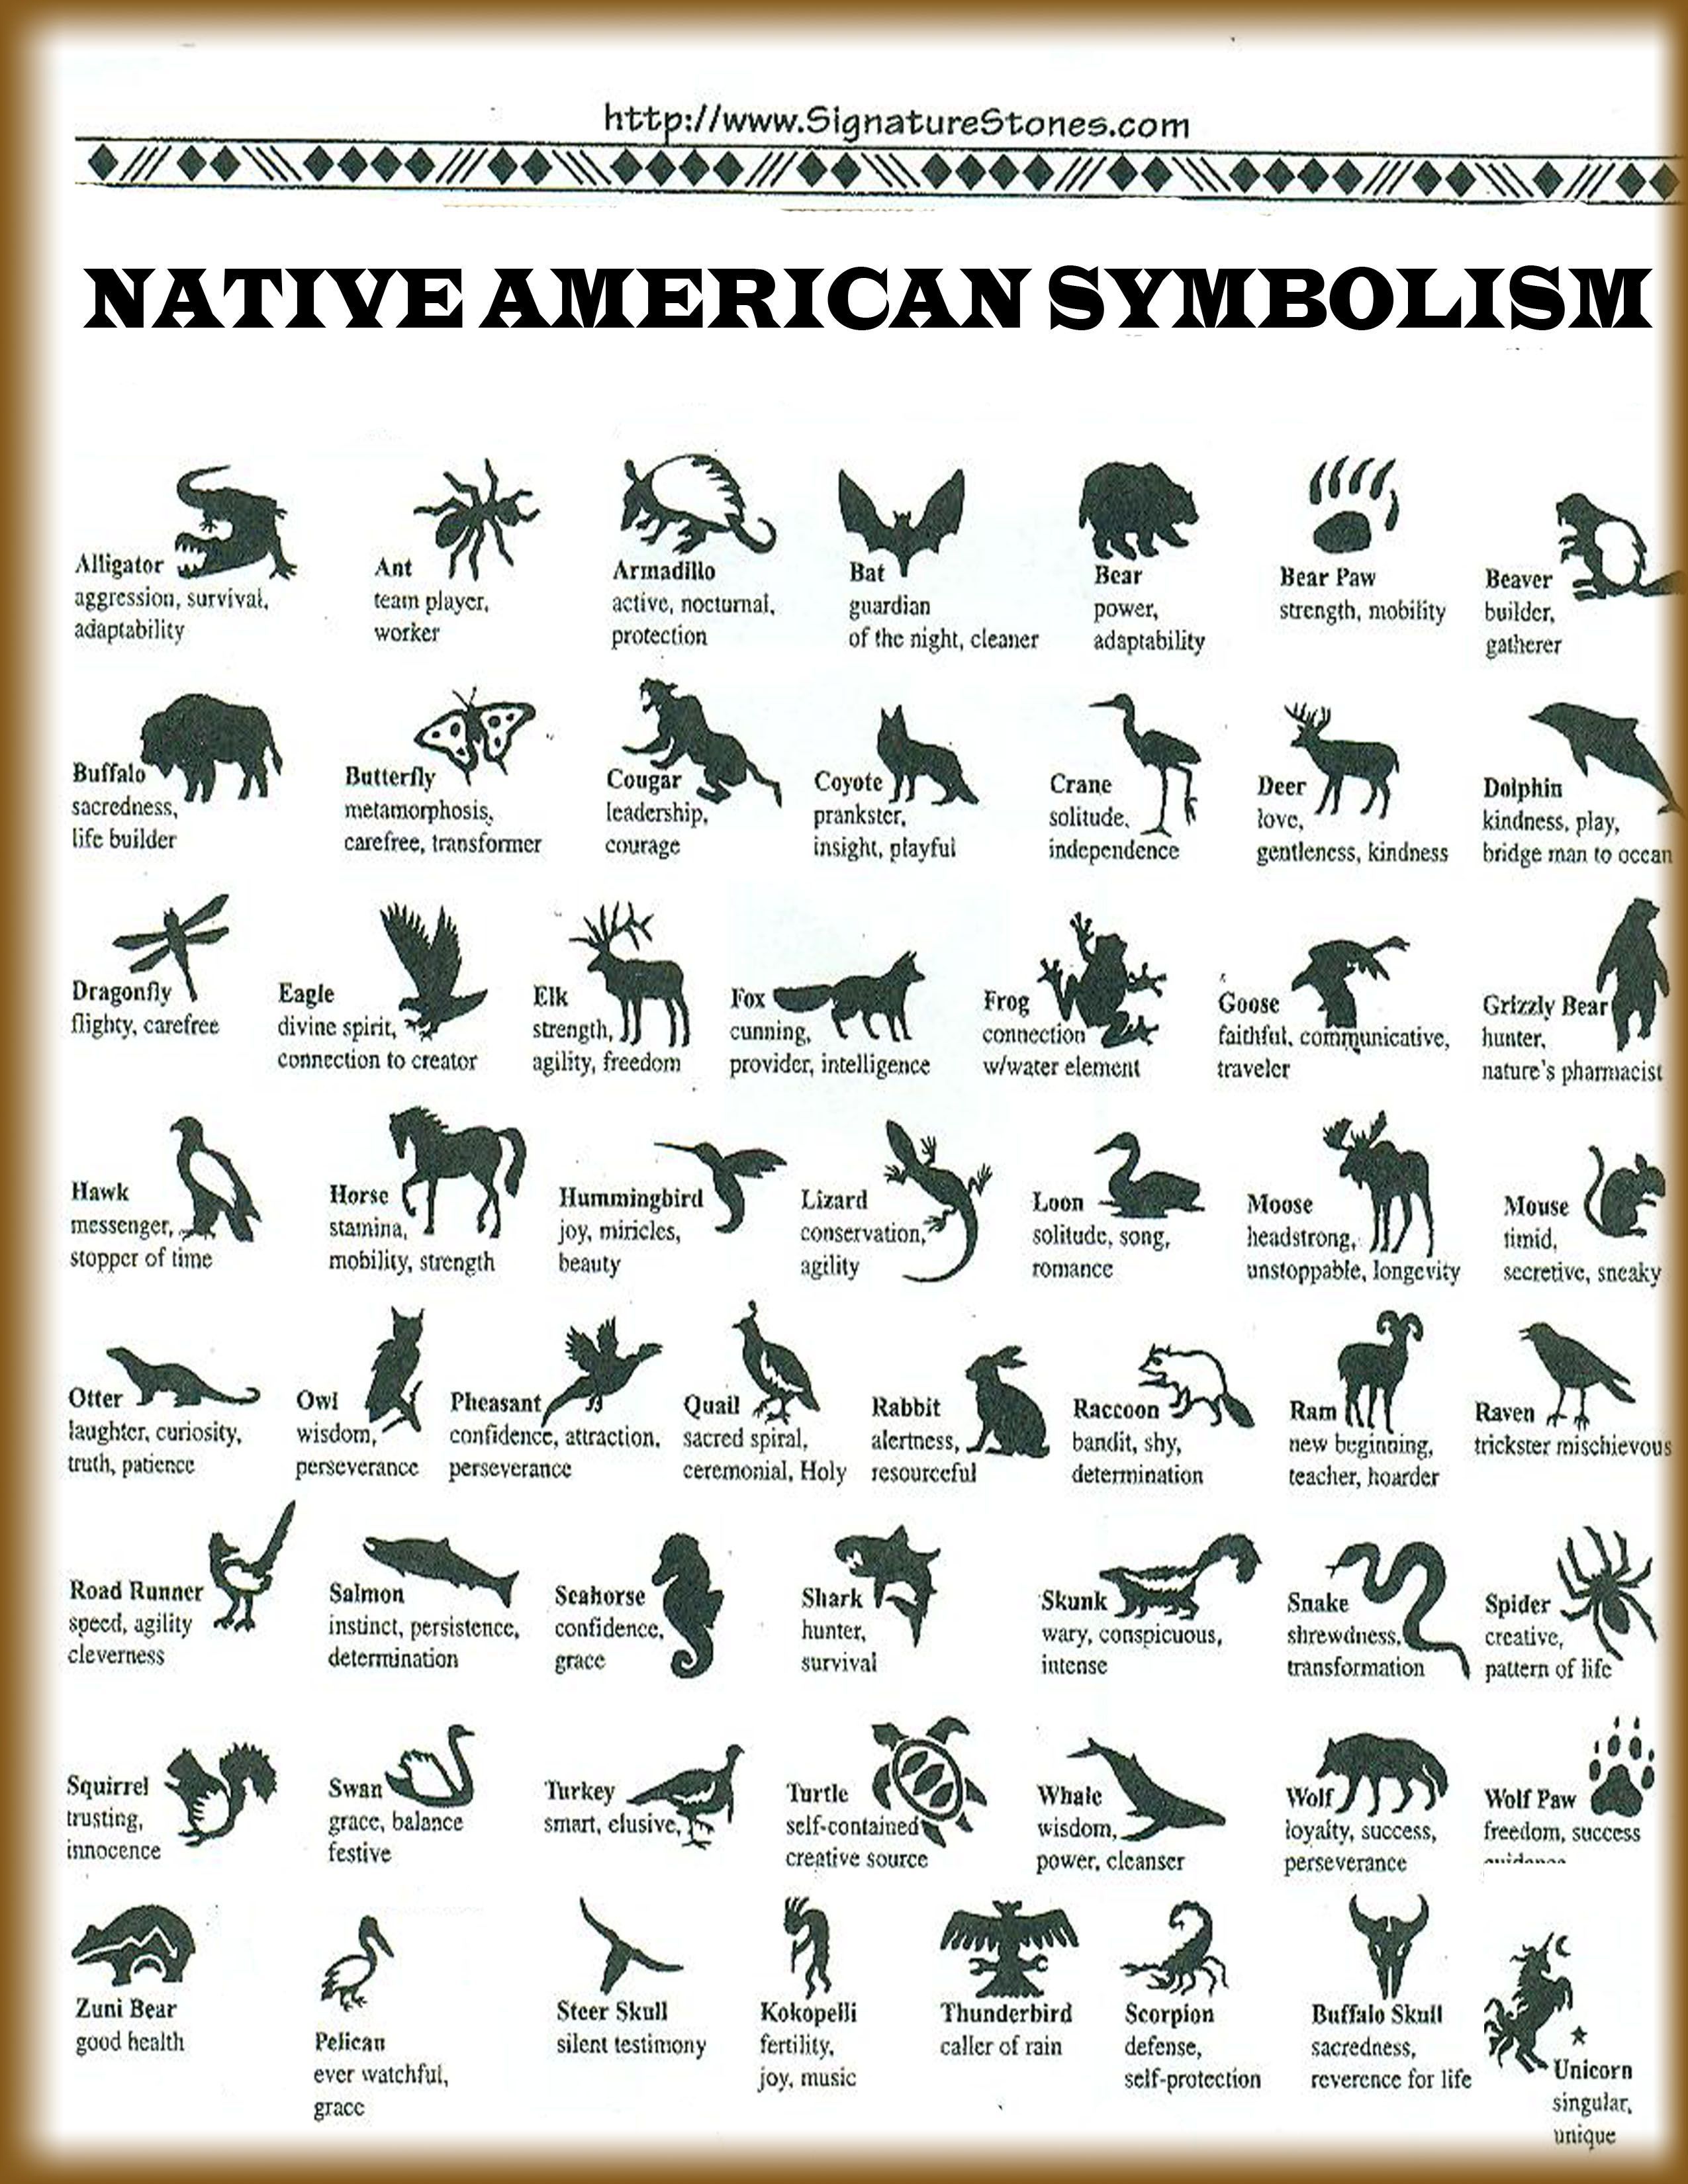 Native American Symbolism; I did not know the unicorn was native to the Western Hemisphere..